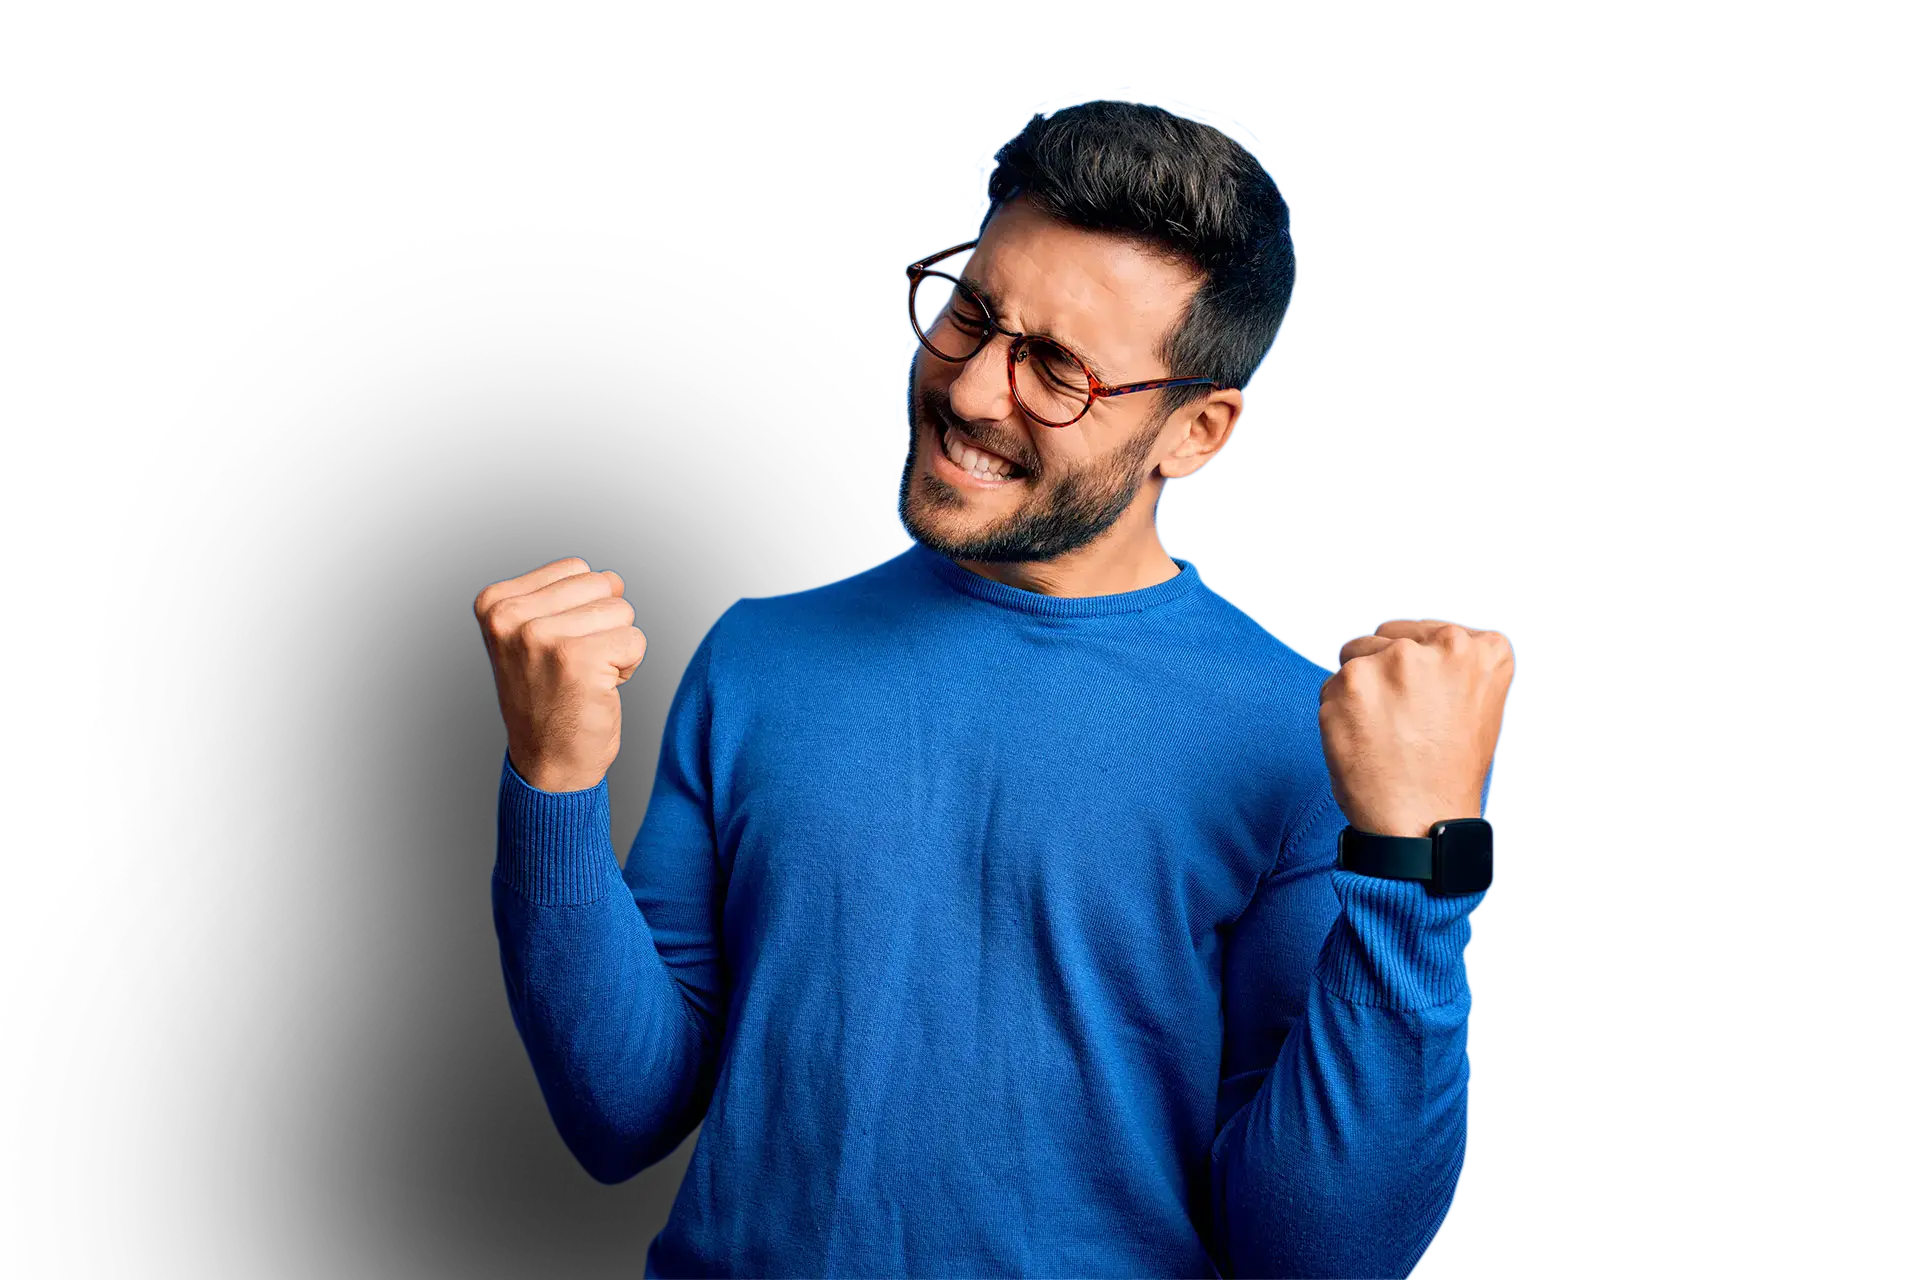 A jubilant man in glasses wearing a blue sweater, with a smartwatch, fists pumped in a victorious gesture against a blue and black background.